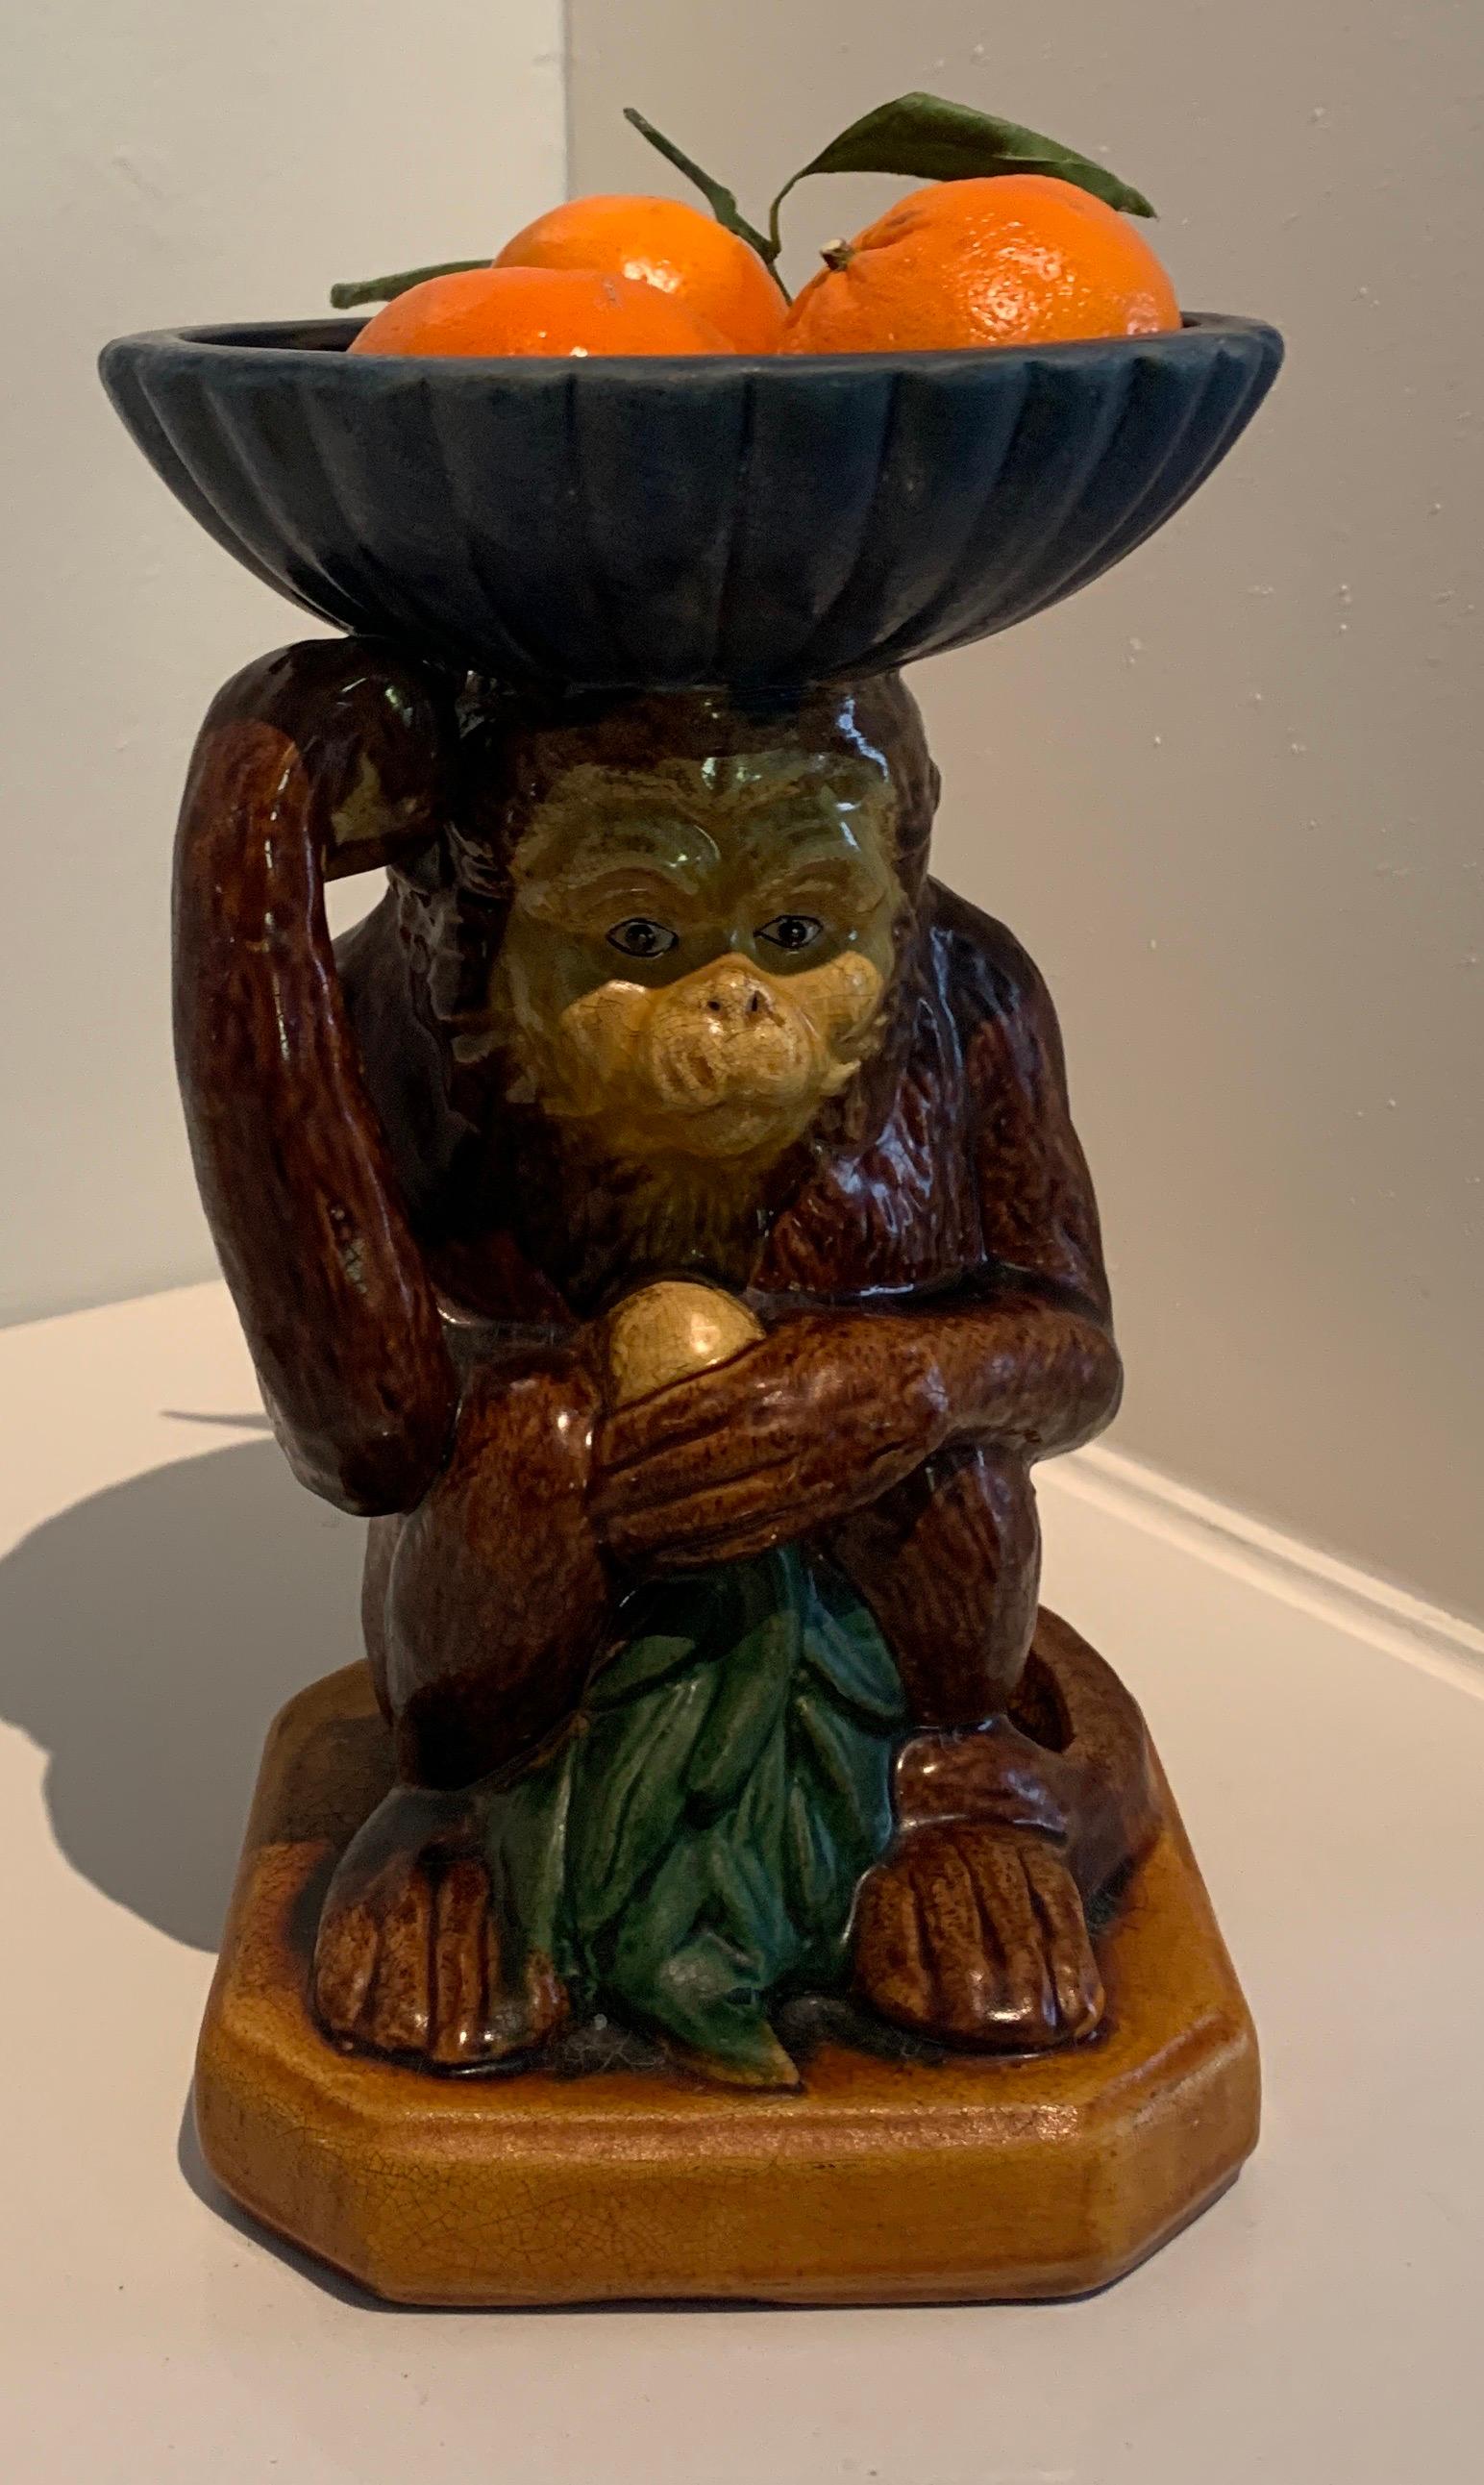 French terra cotta Majolica bowl with monkey - a vivid color Whimsical Monkey with a bowl resting on it's head. A stand alone decorative piece or perfect for everything from odds and ends to nots or fruit on a table.